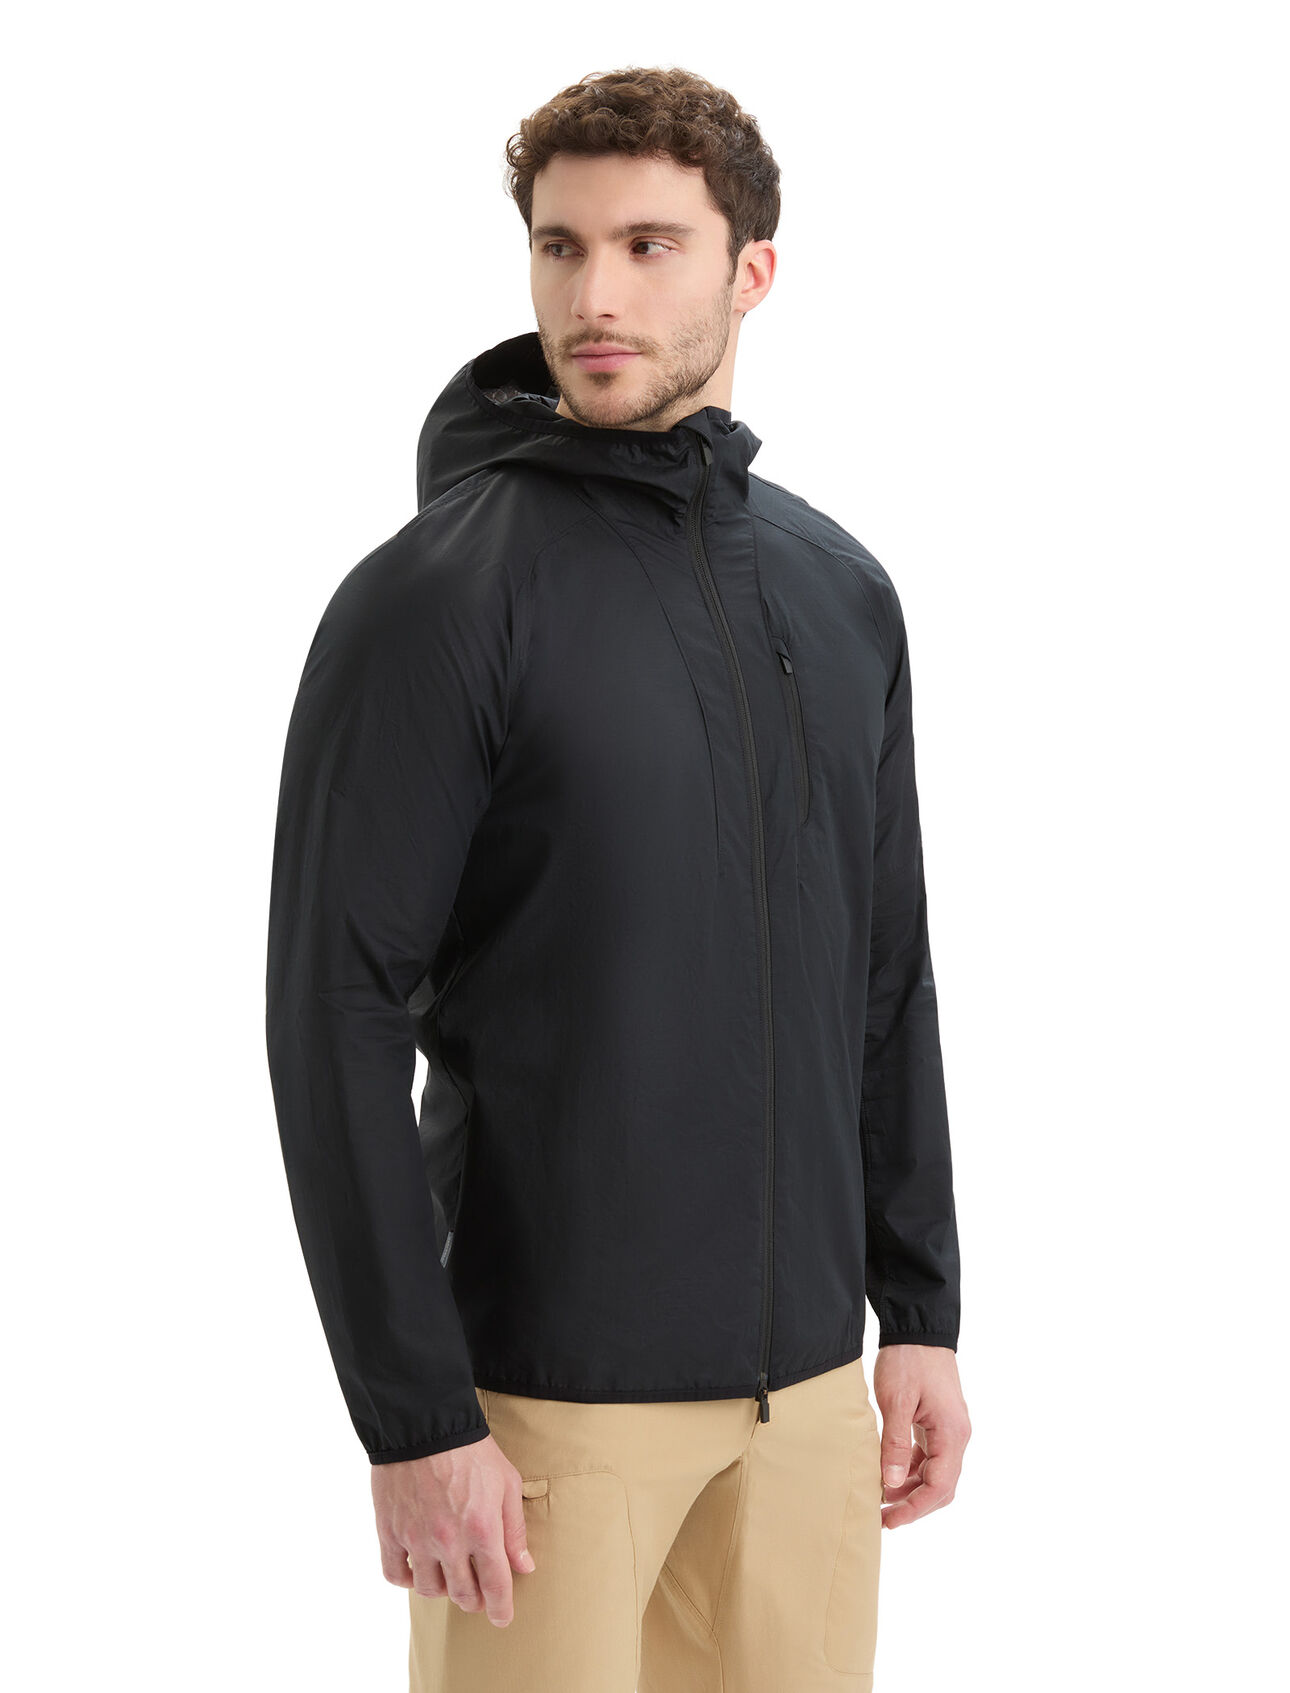 Mens Shell+™ Merino Cotton Windbreaker A lightweight layer that shields against the wind and light rain during active mountain adventures, the Shell+™ Cotton Windbreaker puts a natural spin on technical outerwear.